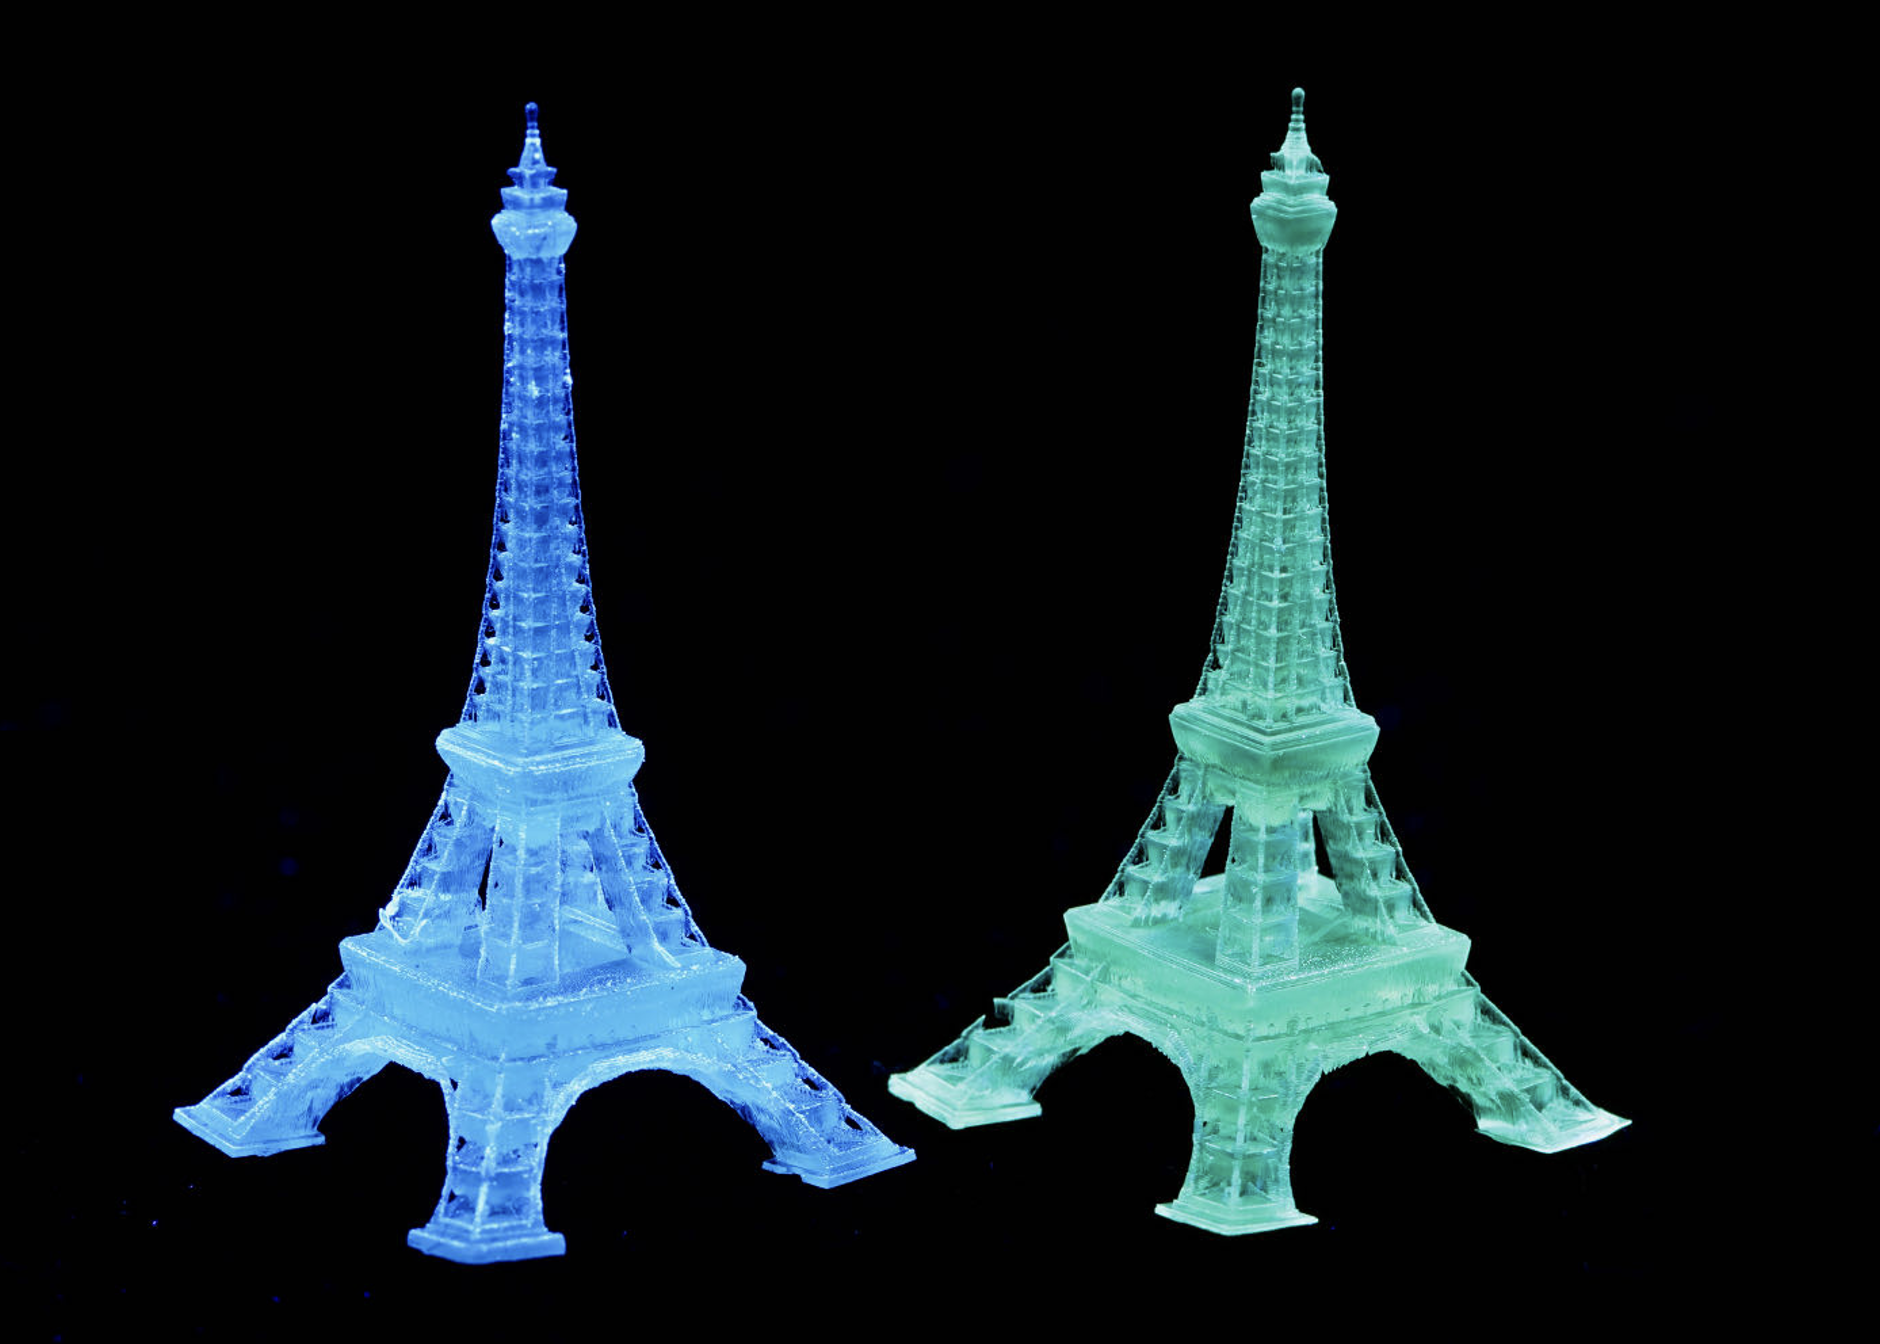 Eiffel Tower-shaped luminescent structures 3D-printed from supramolecular ink.